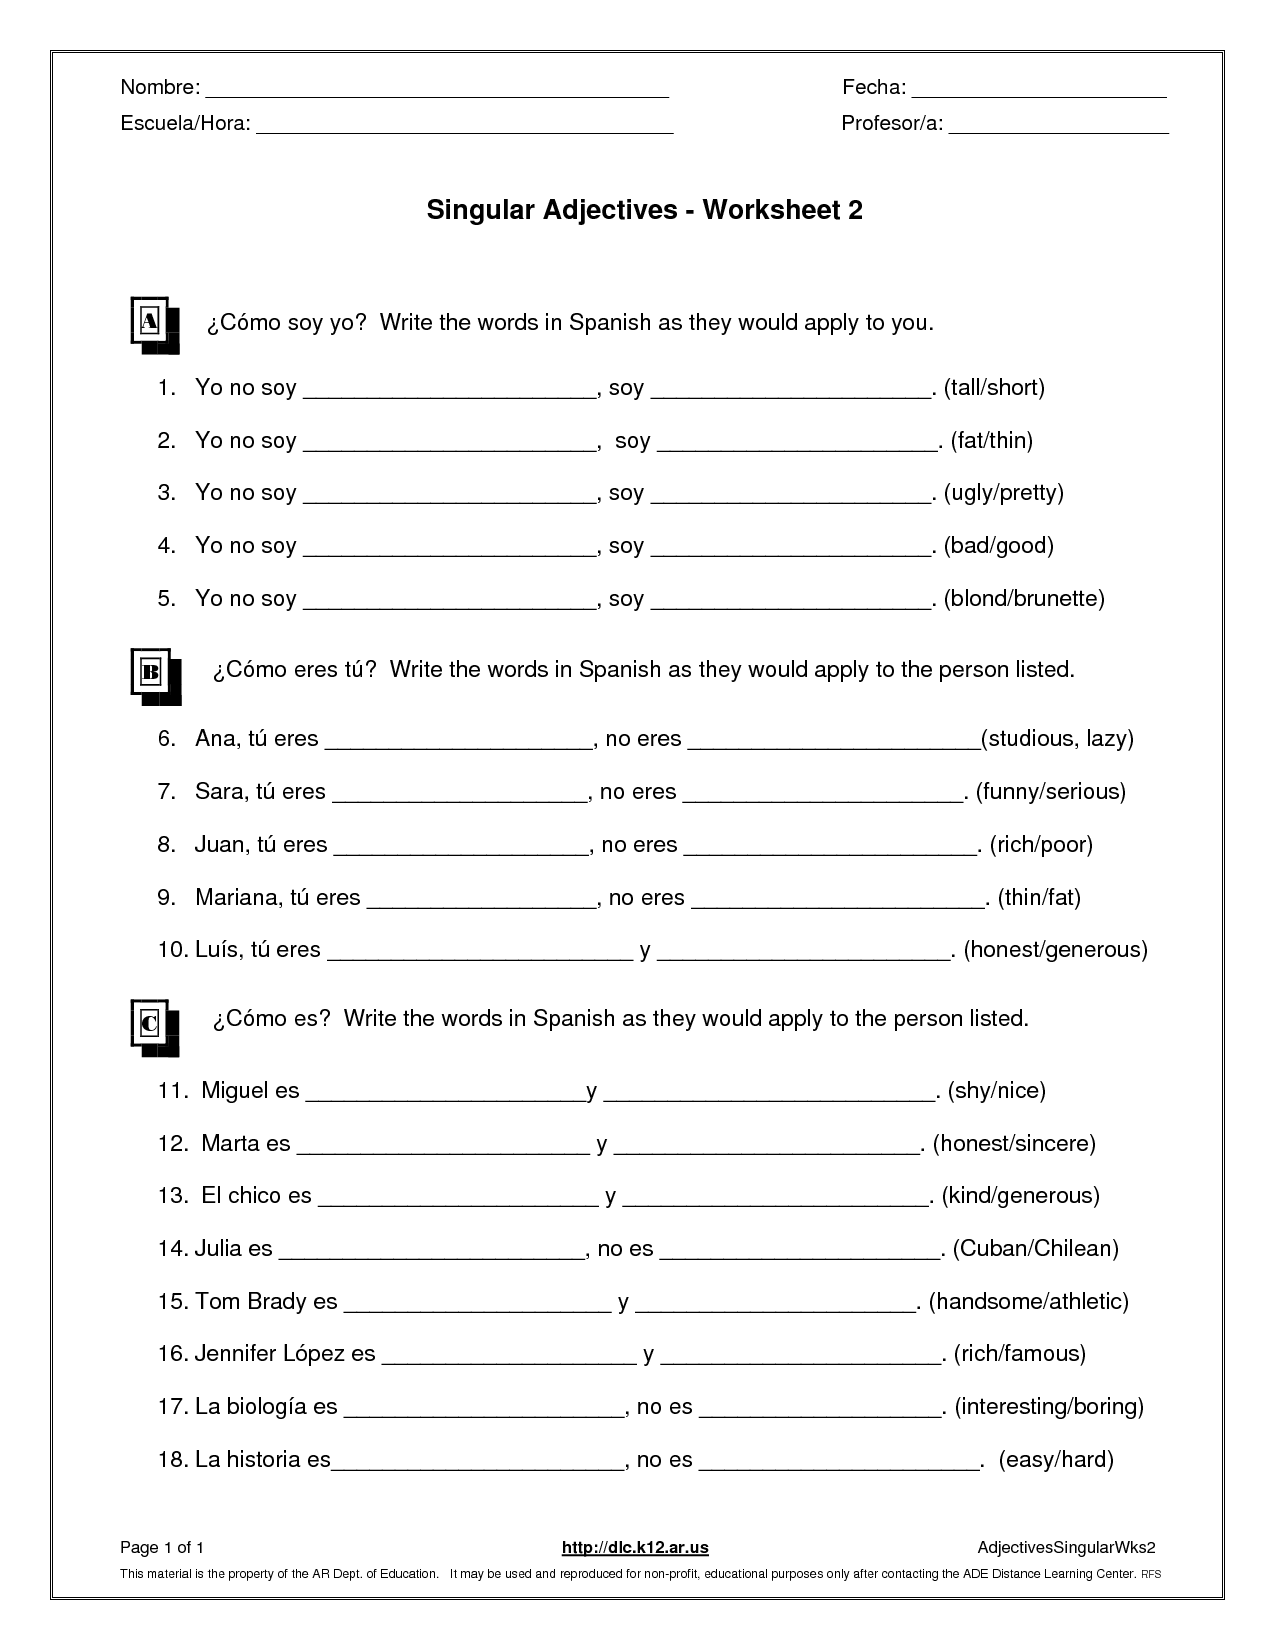 15-best-images-of-adverbs-worksheet-with-answers-adverbs-frequency-worksheets-printable-parts